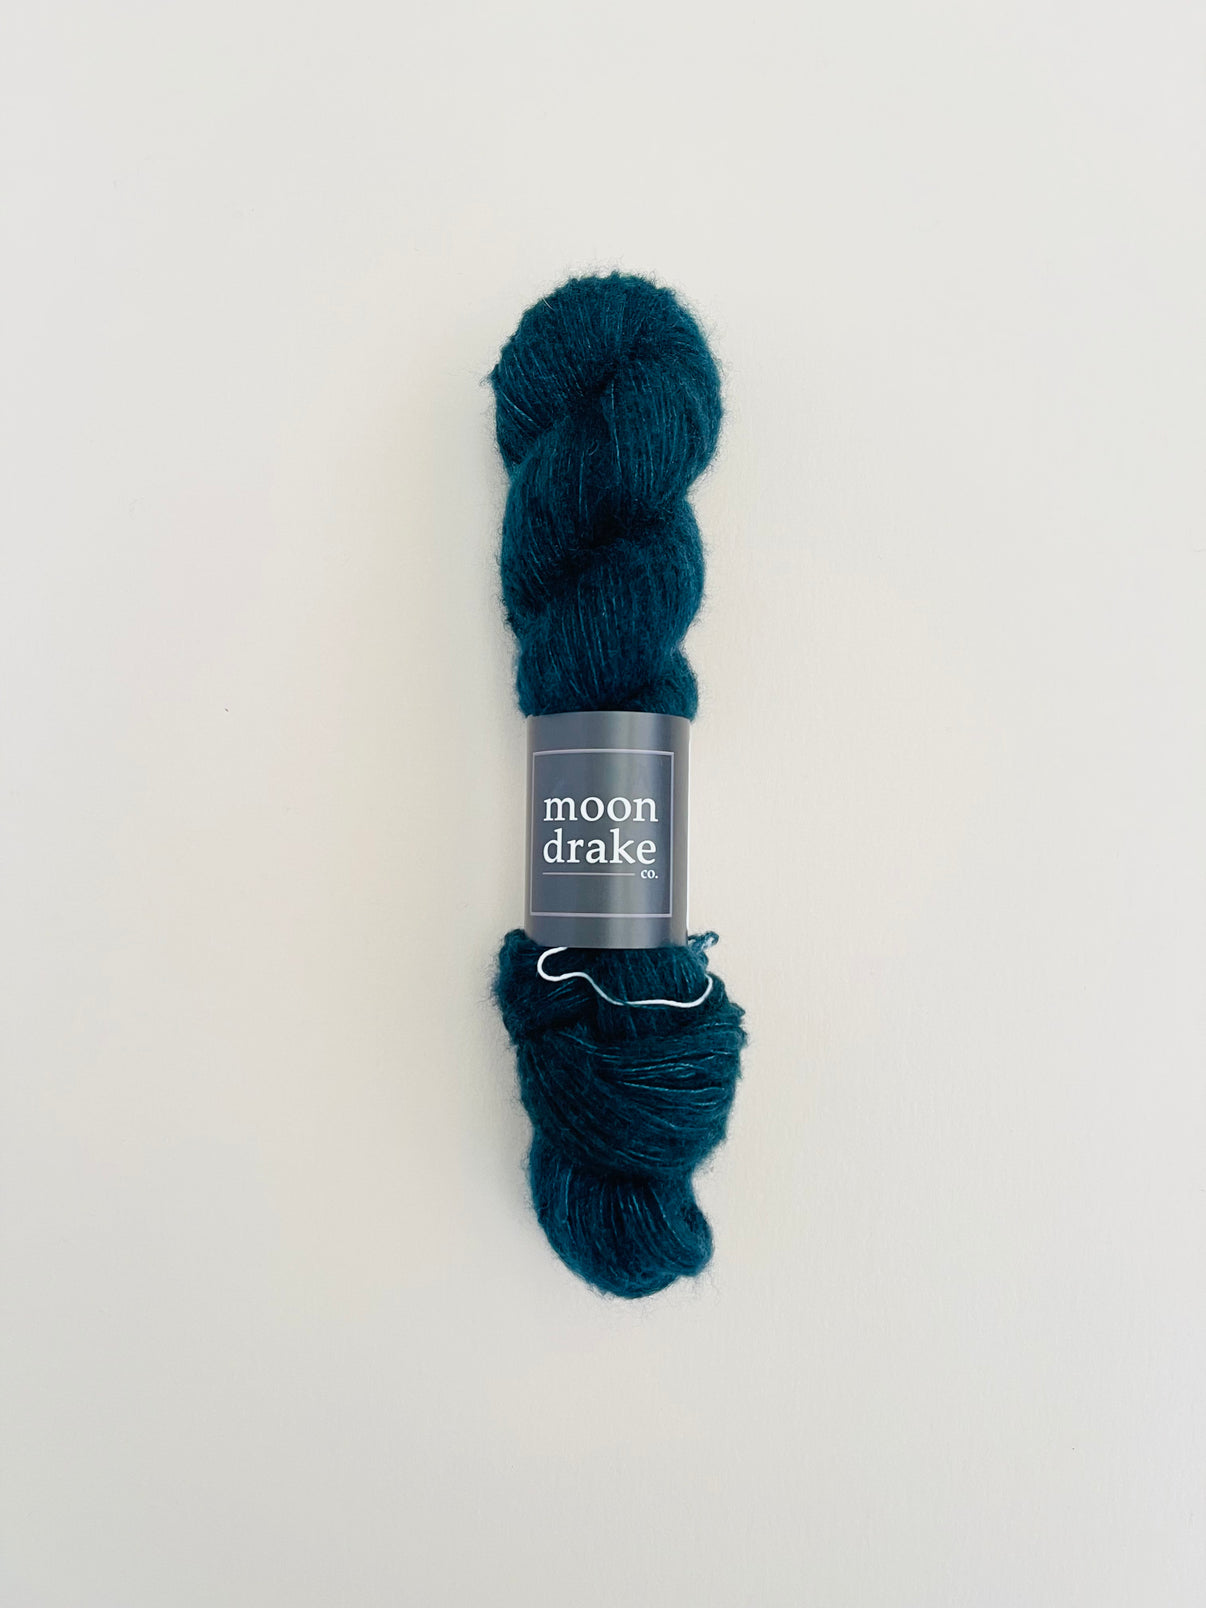 A deep teal colored skein of fuzzy textured yarn.